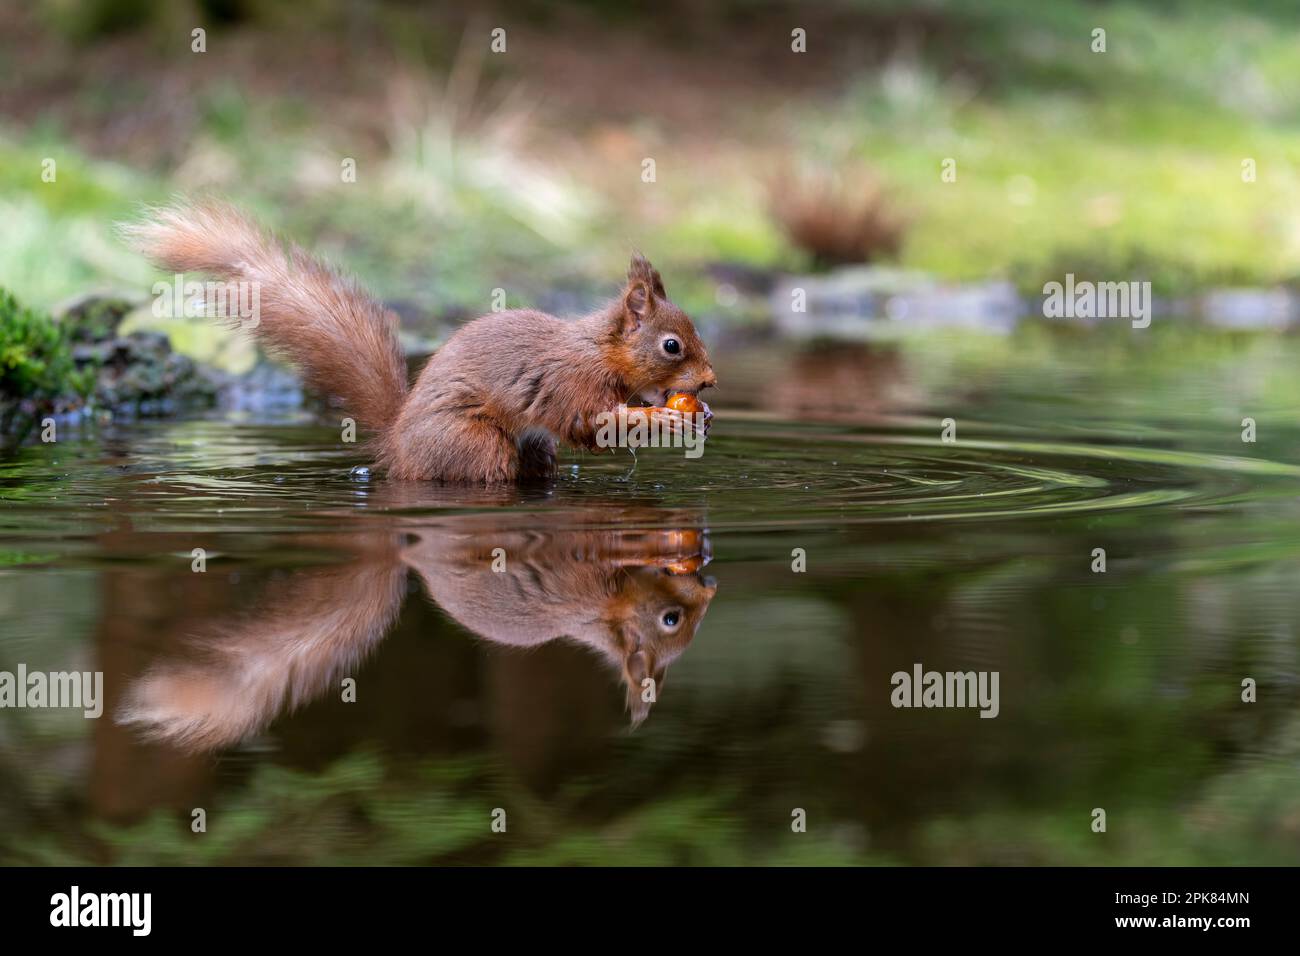 A British Red Squirrel, (Sciurus vulgaris), standing in a pool of water eating a Hazelnut, (with reflection) Stock Photo